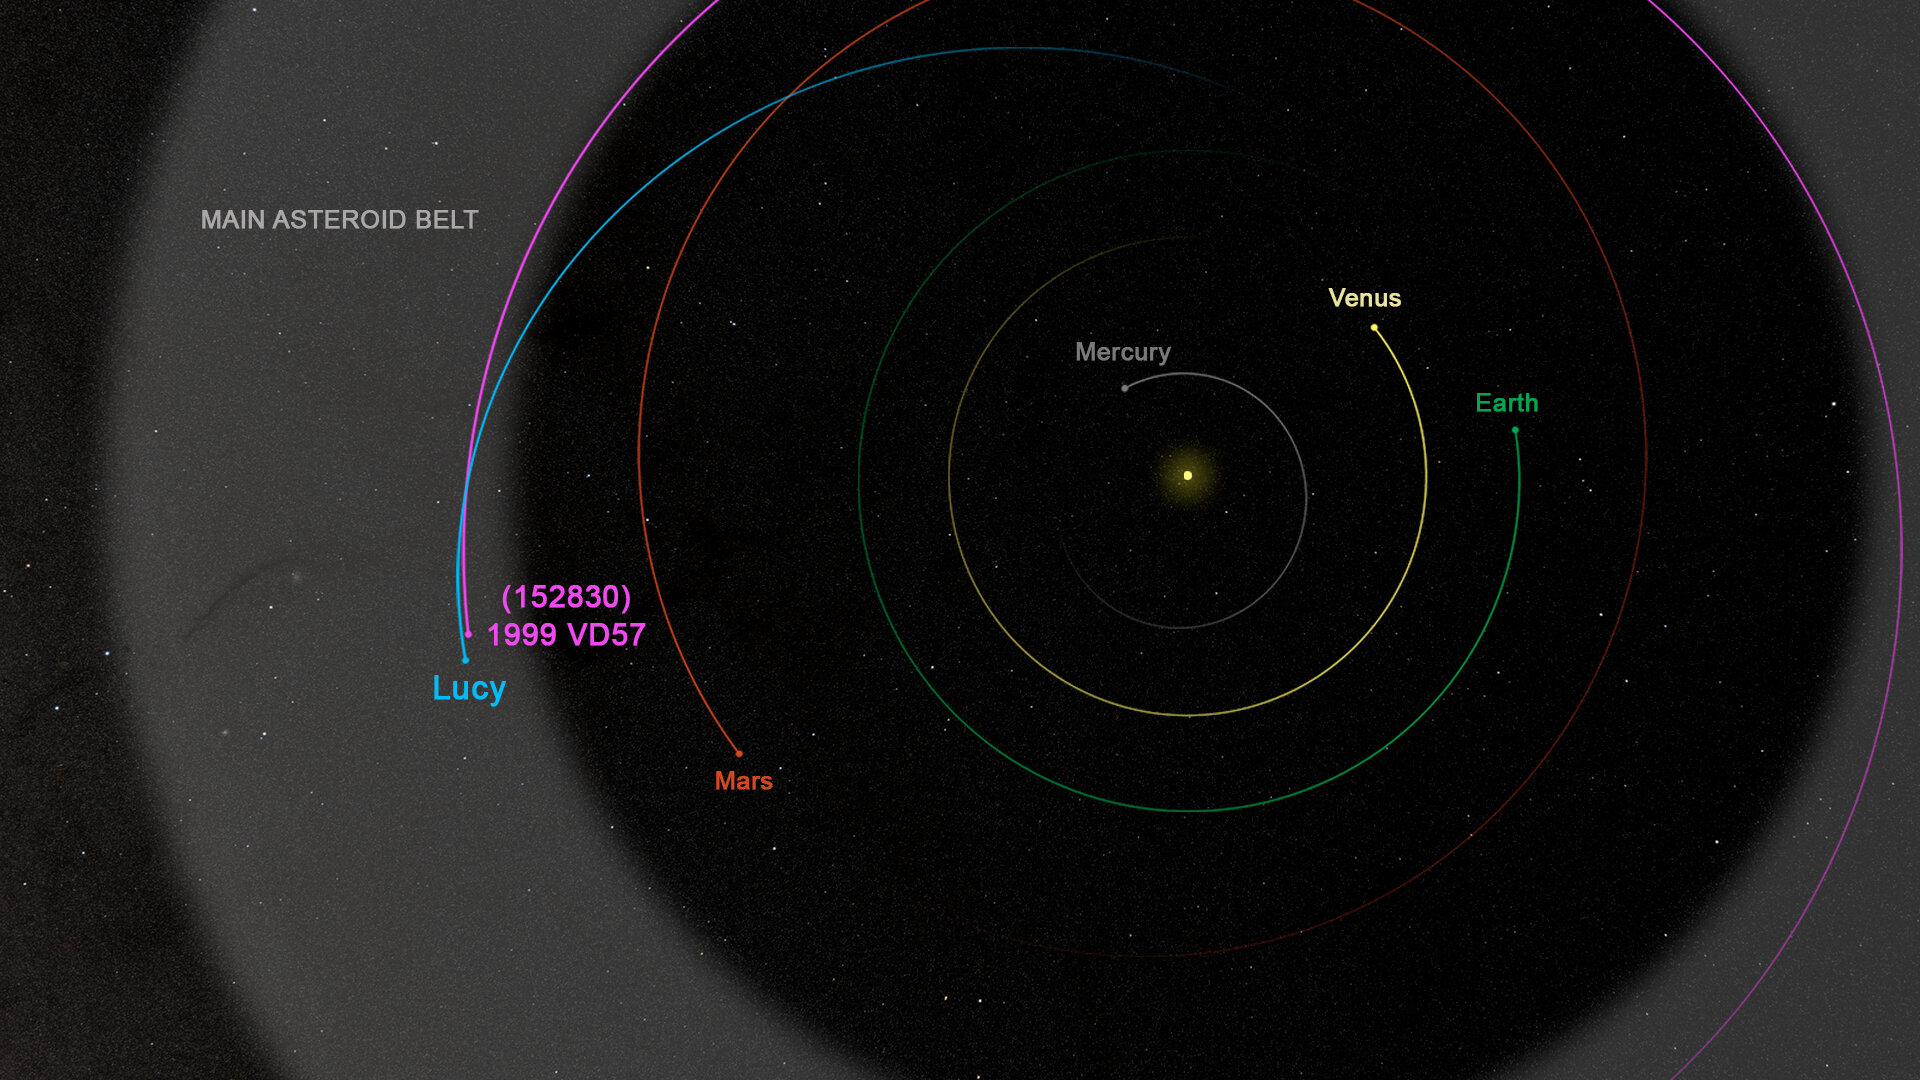 The spacecraft's trajectory